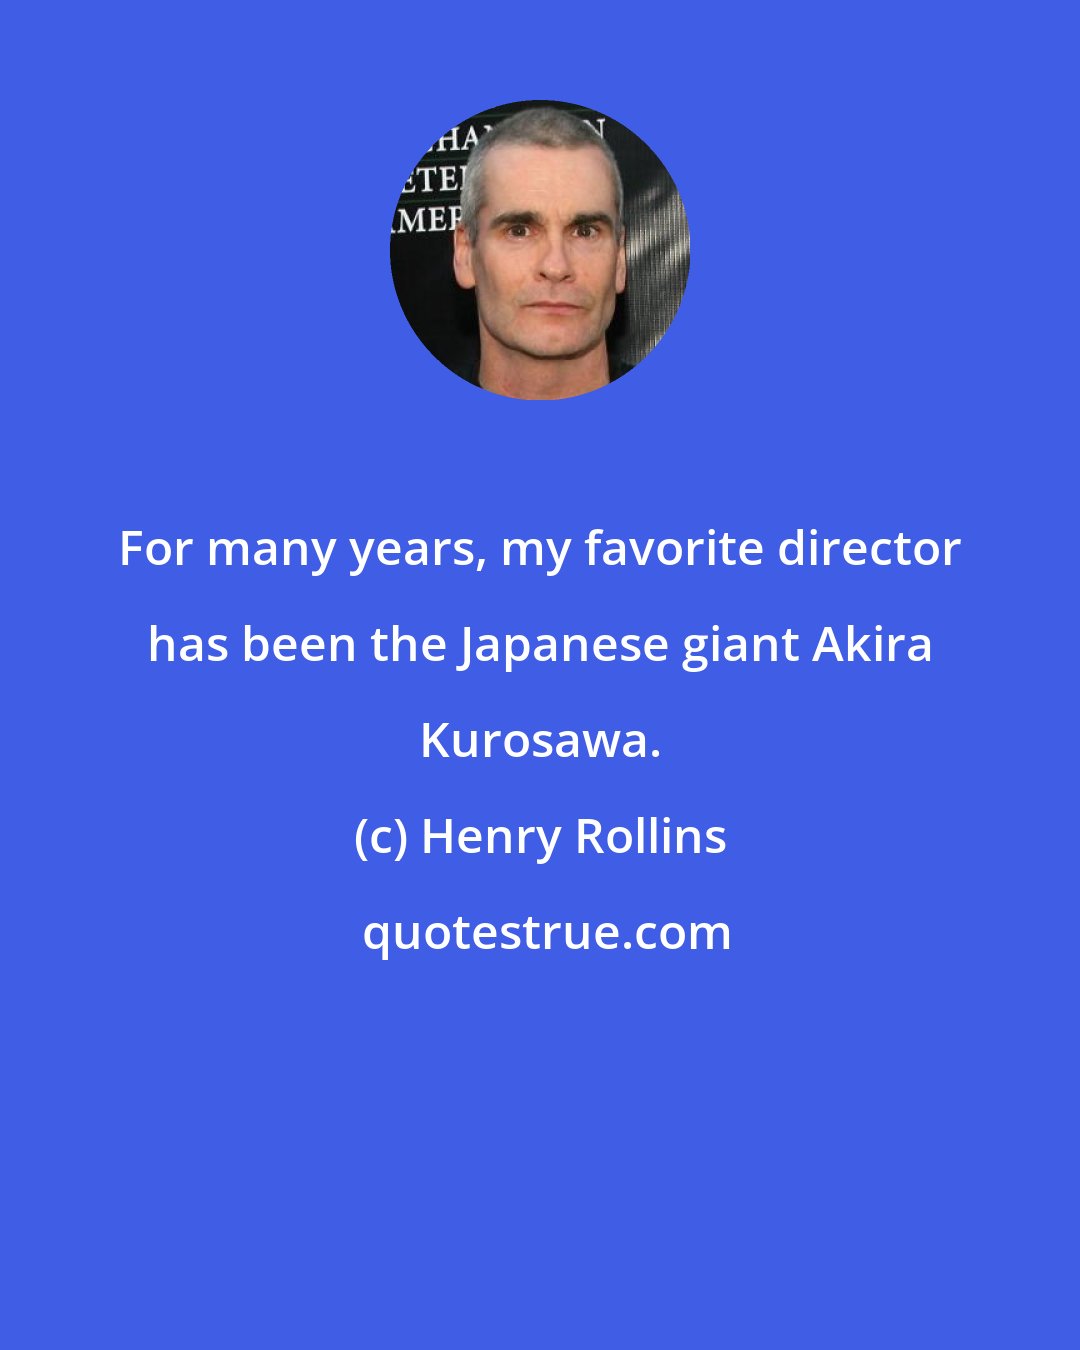 Henry Rollins: For many years, my favorite director has been the Japanese giant Akira Kurosawa.